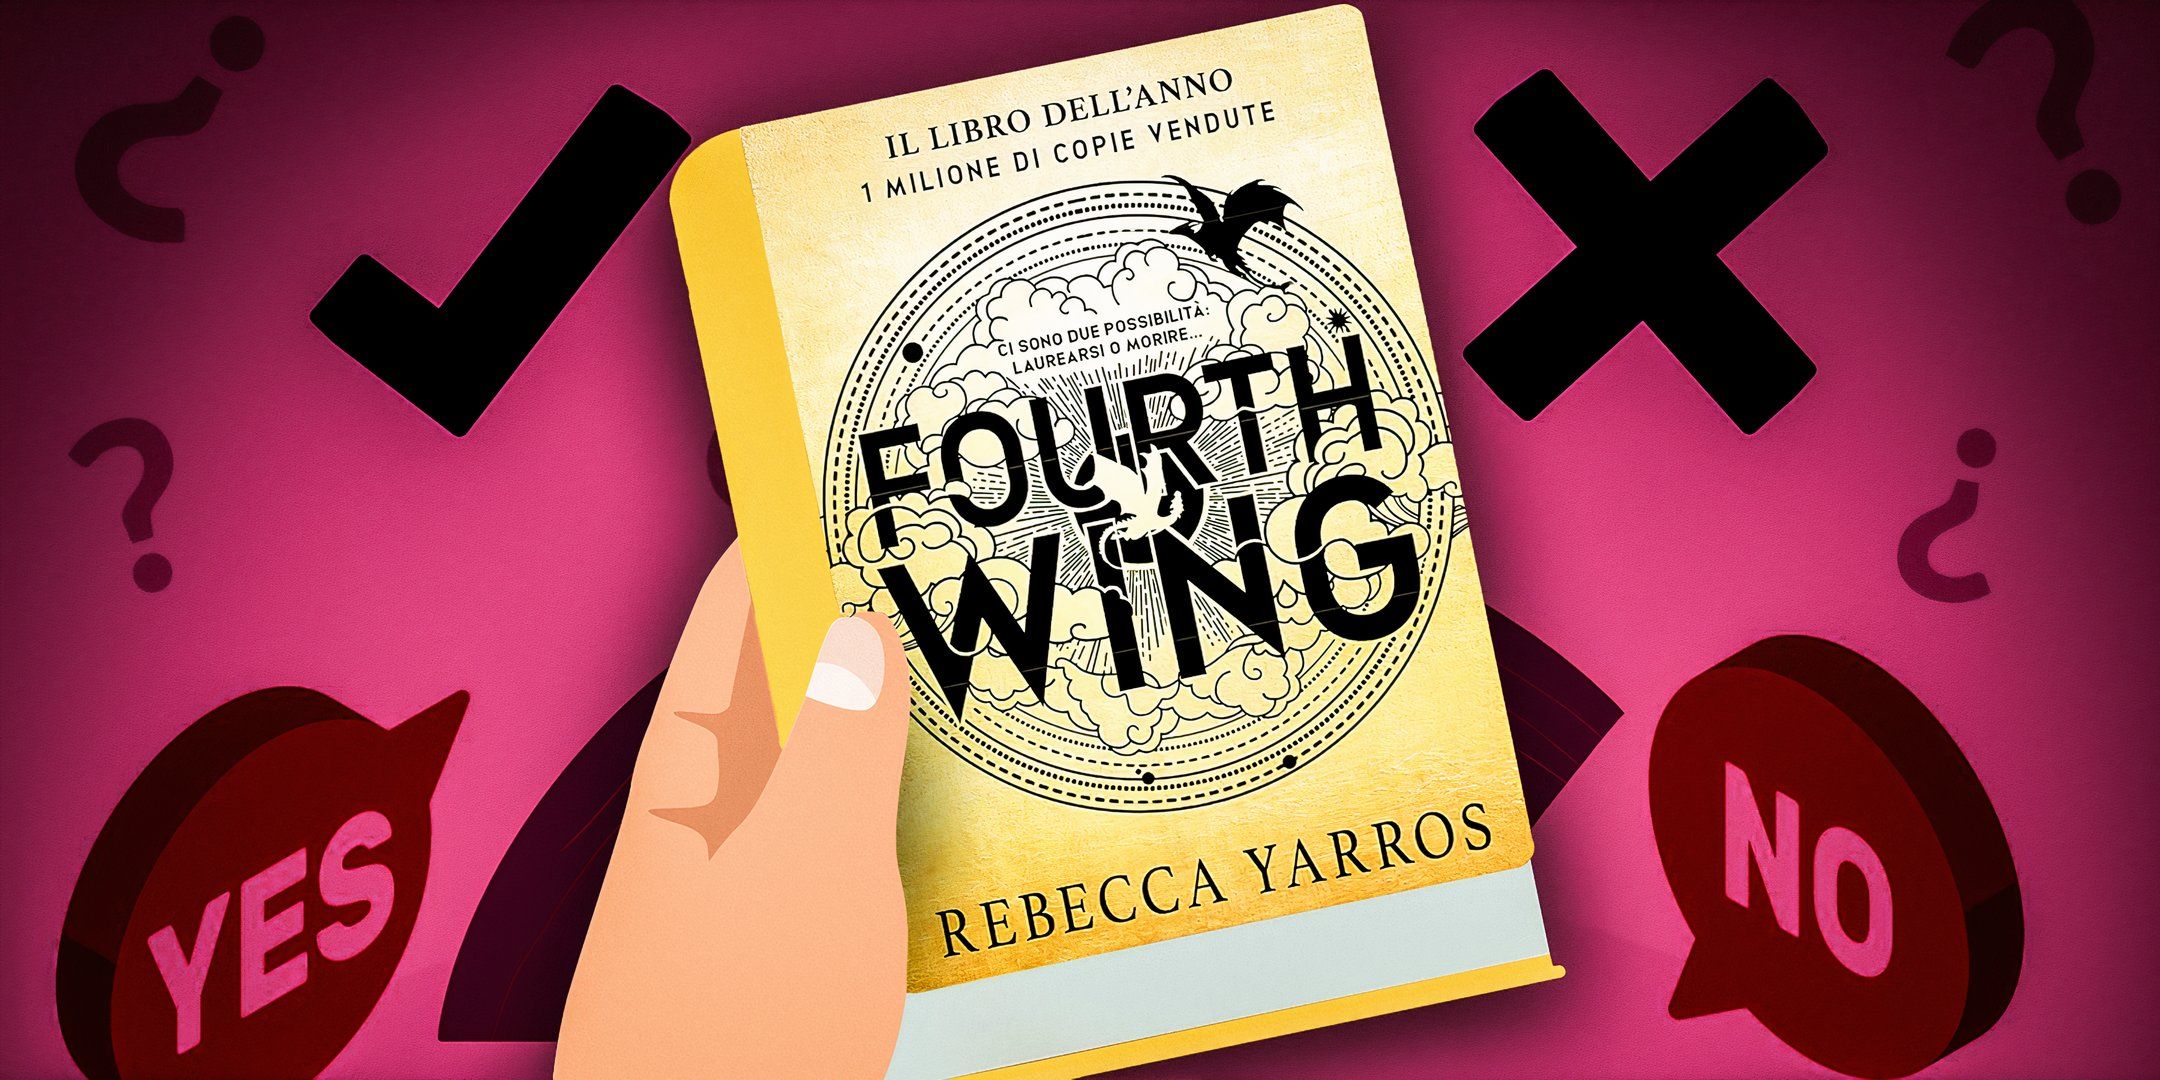 Custom animated image of a hand holding the book Fourth Wing